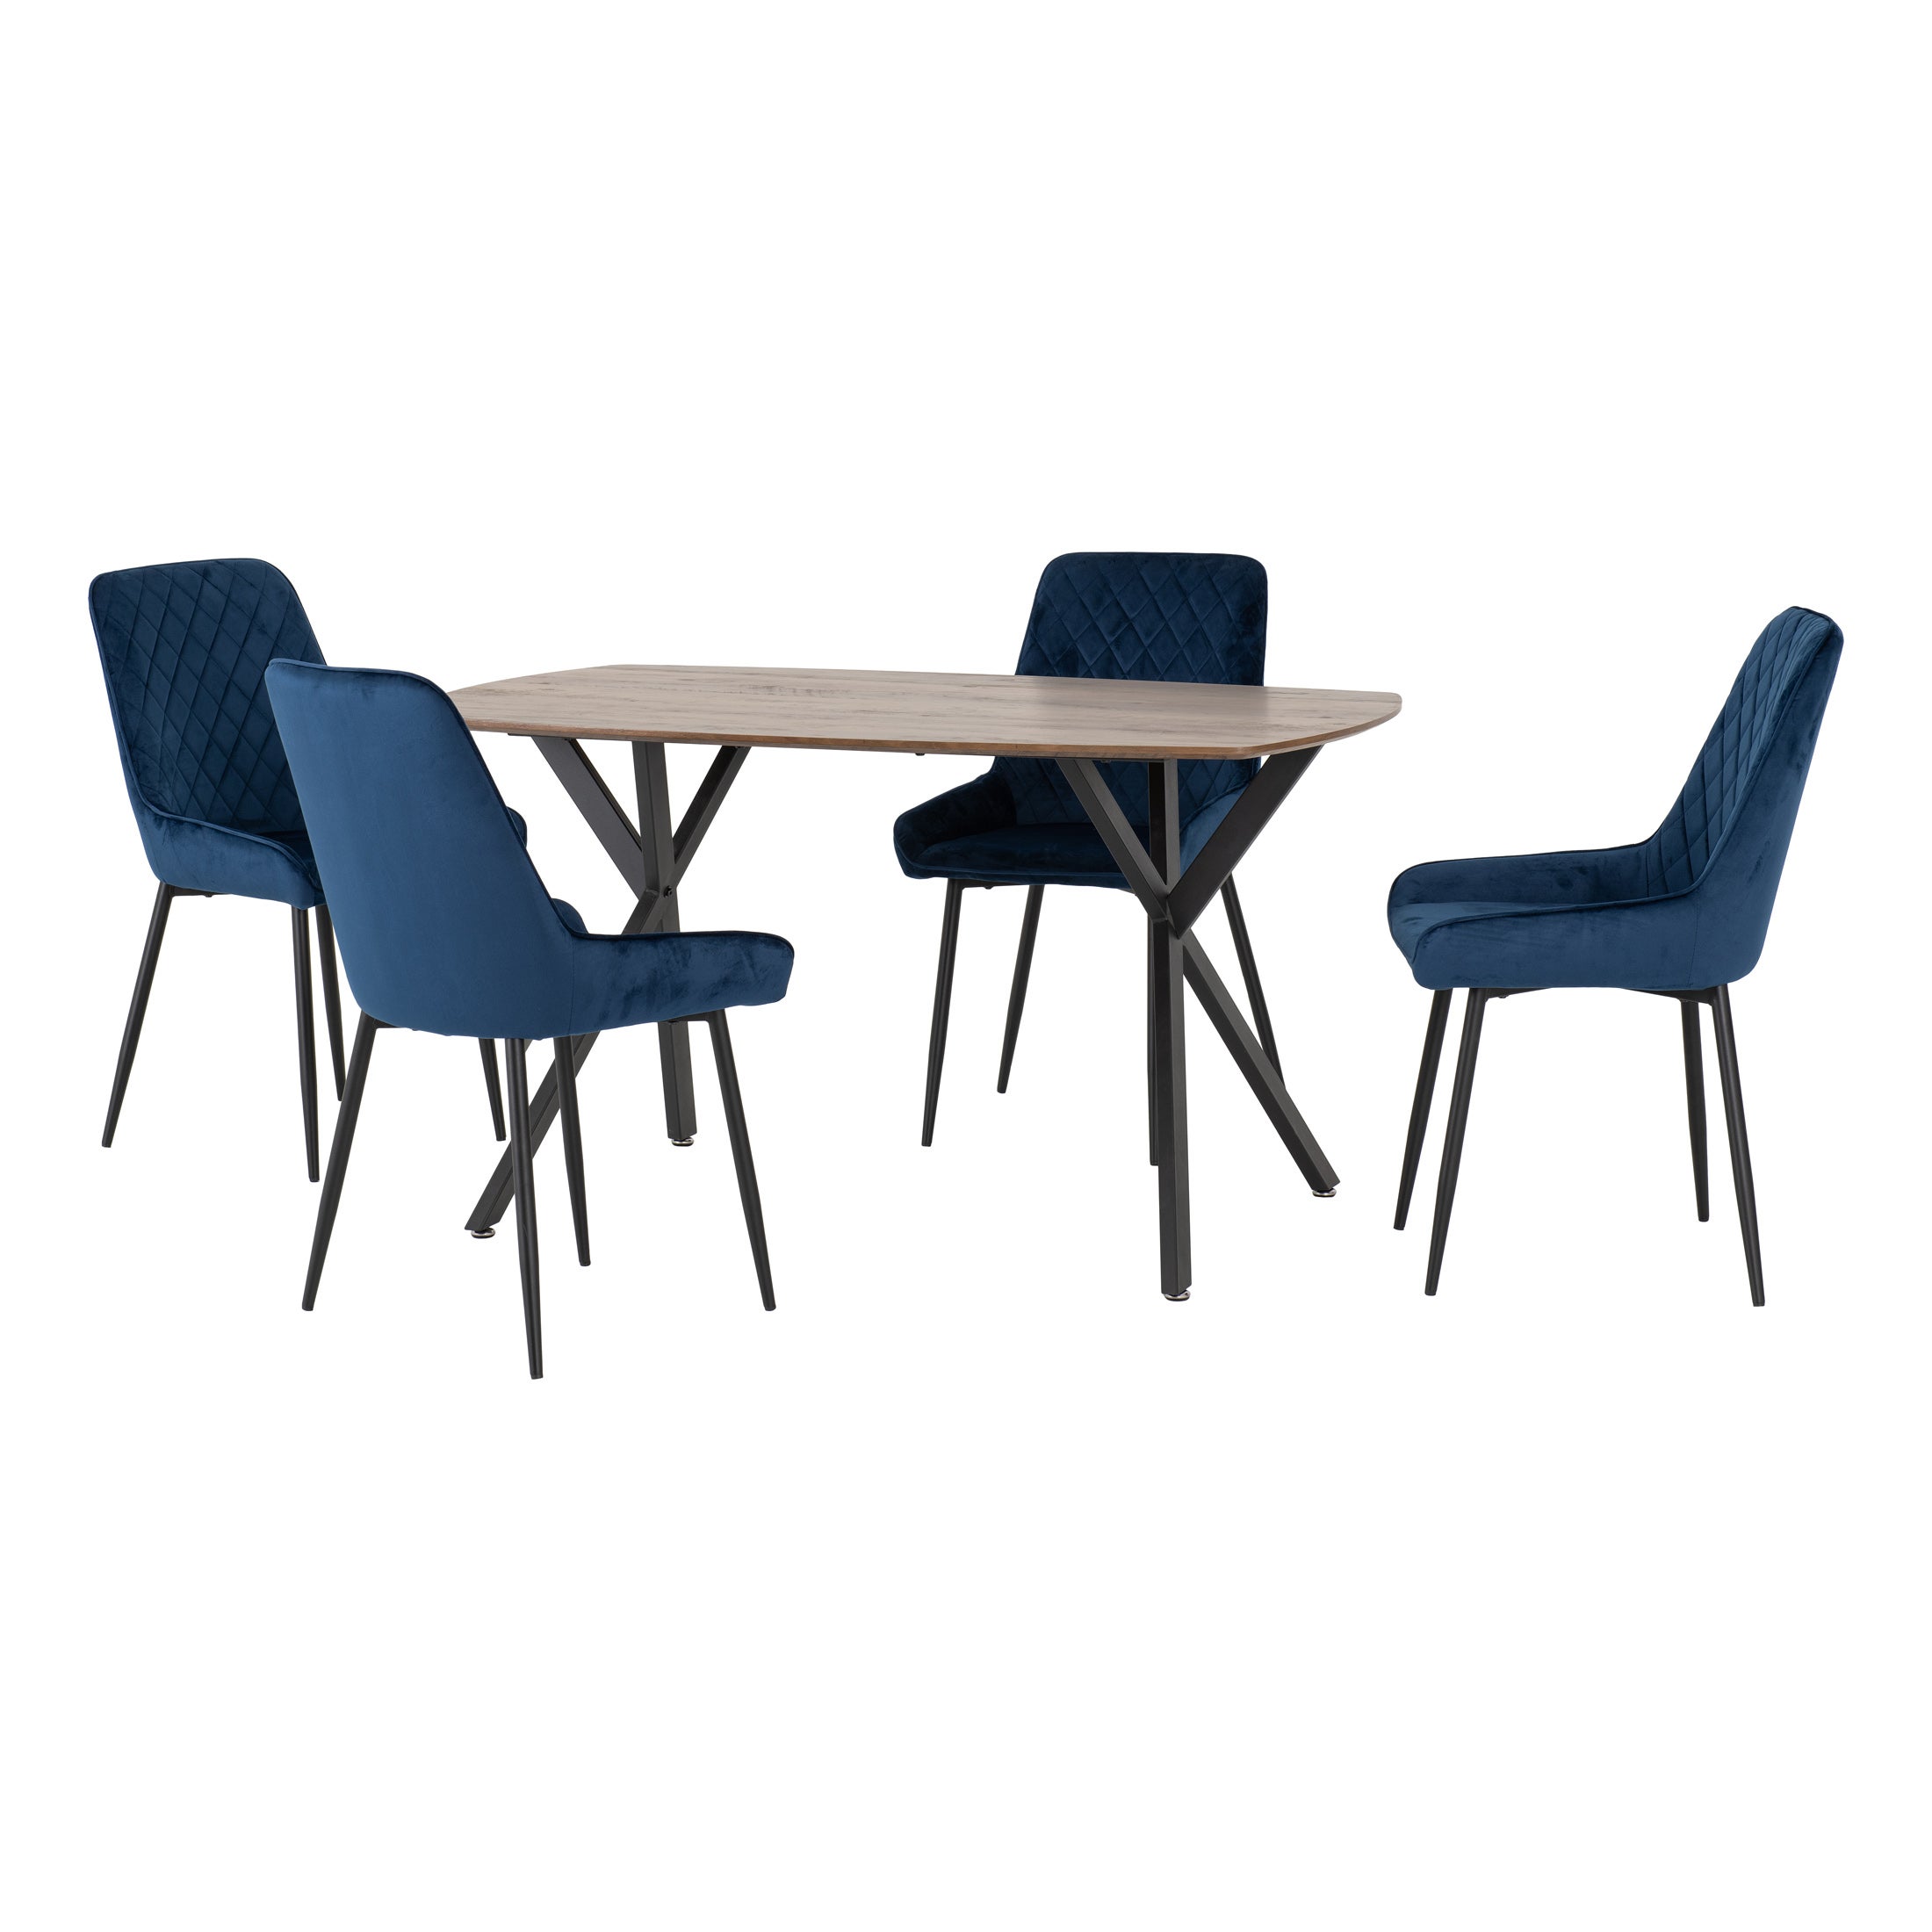 Athens Rectangular Dining Table with 4 Avery Chairs, Oak Effect Navy Blue